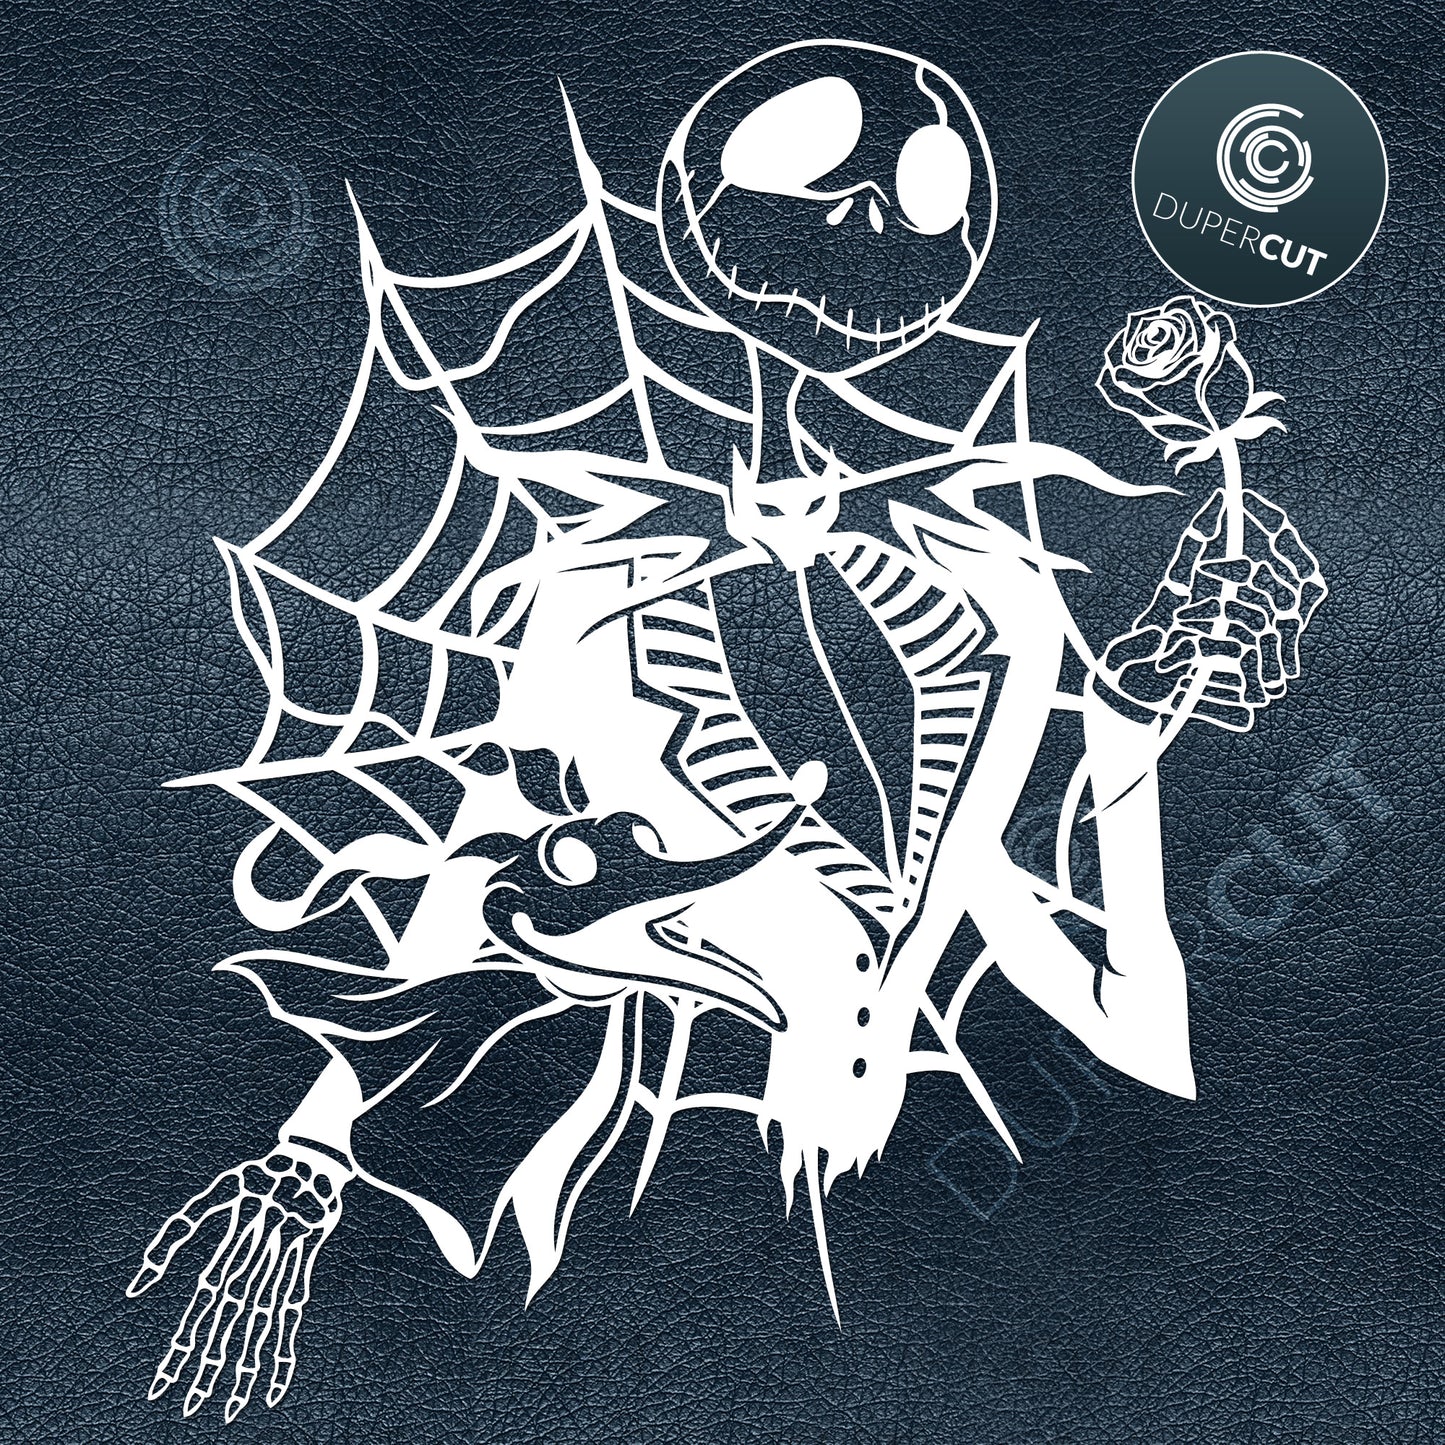 Jack Skellington detailed art. Nightmare before Christmas. Papercutting template for commercial use. SVG files for Silhouette Cameo, Cricut, Glowforge, DXF for CNC, laser cutting, print on demand